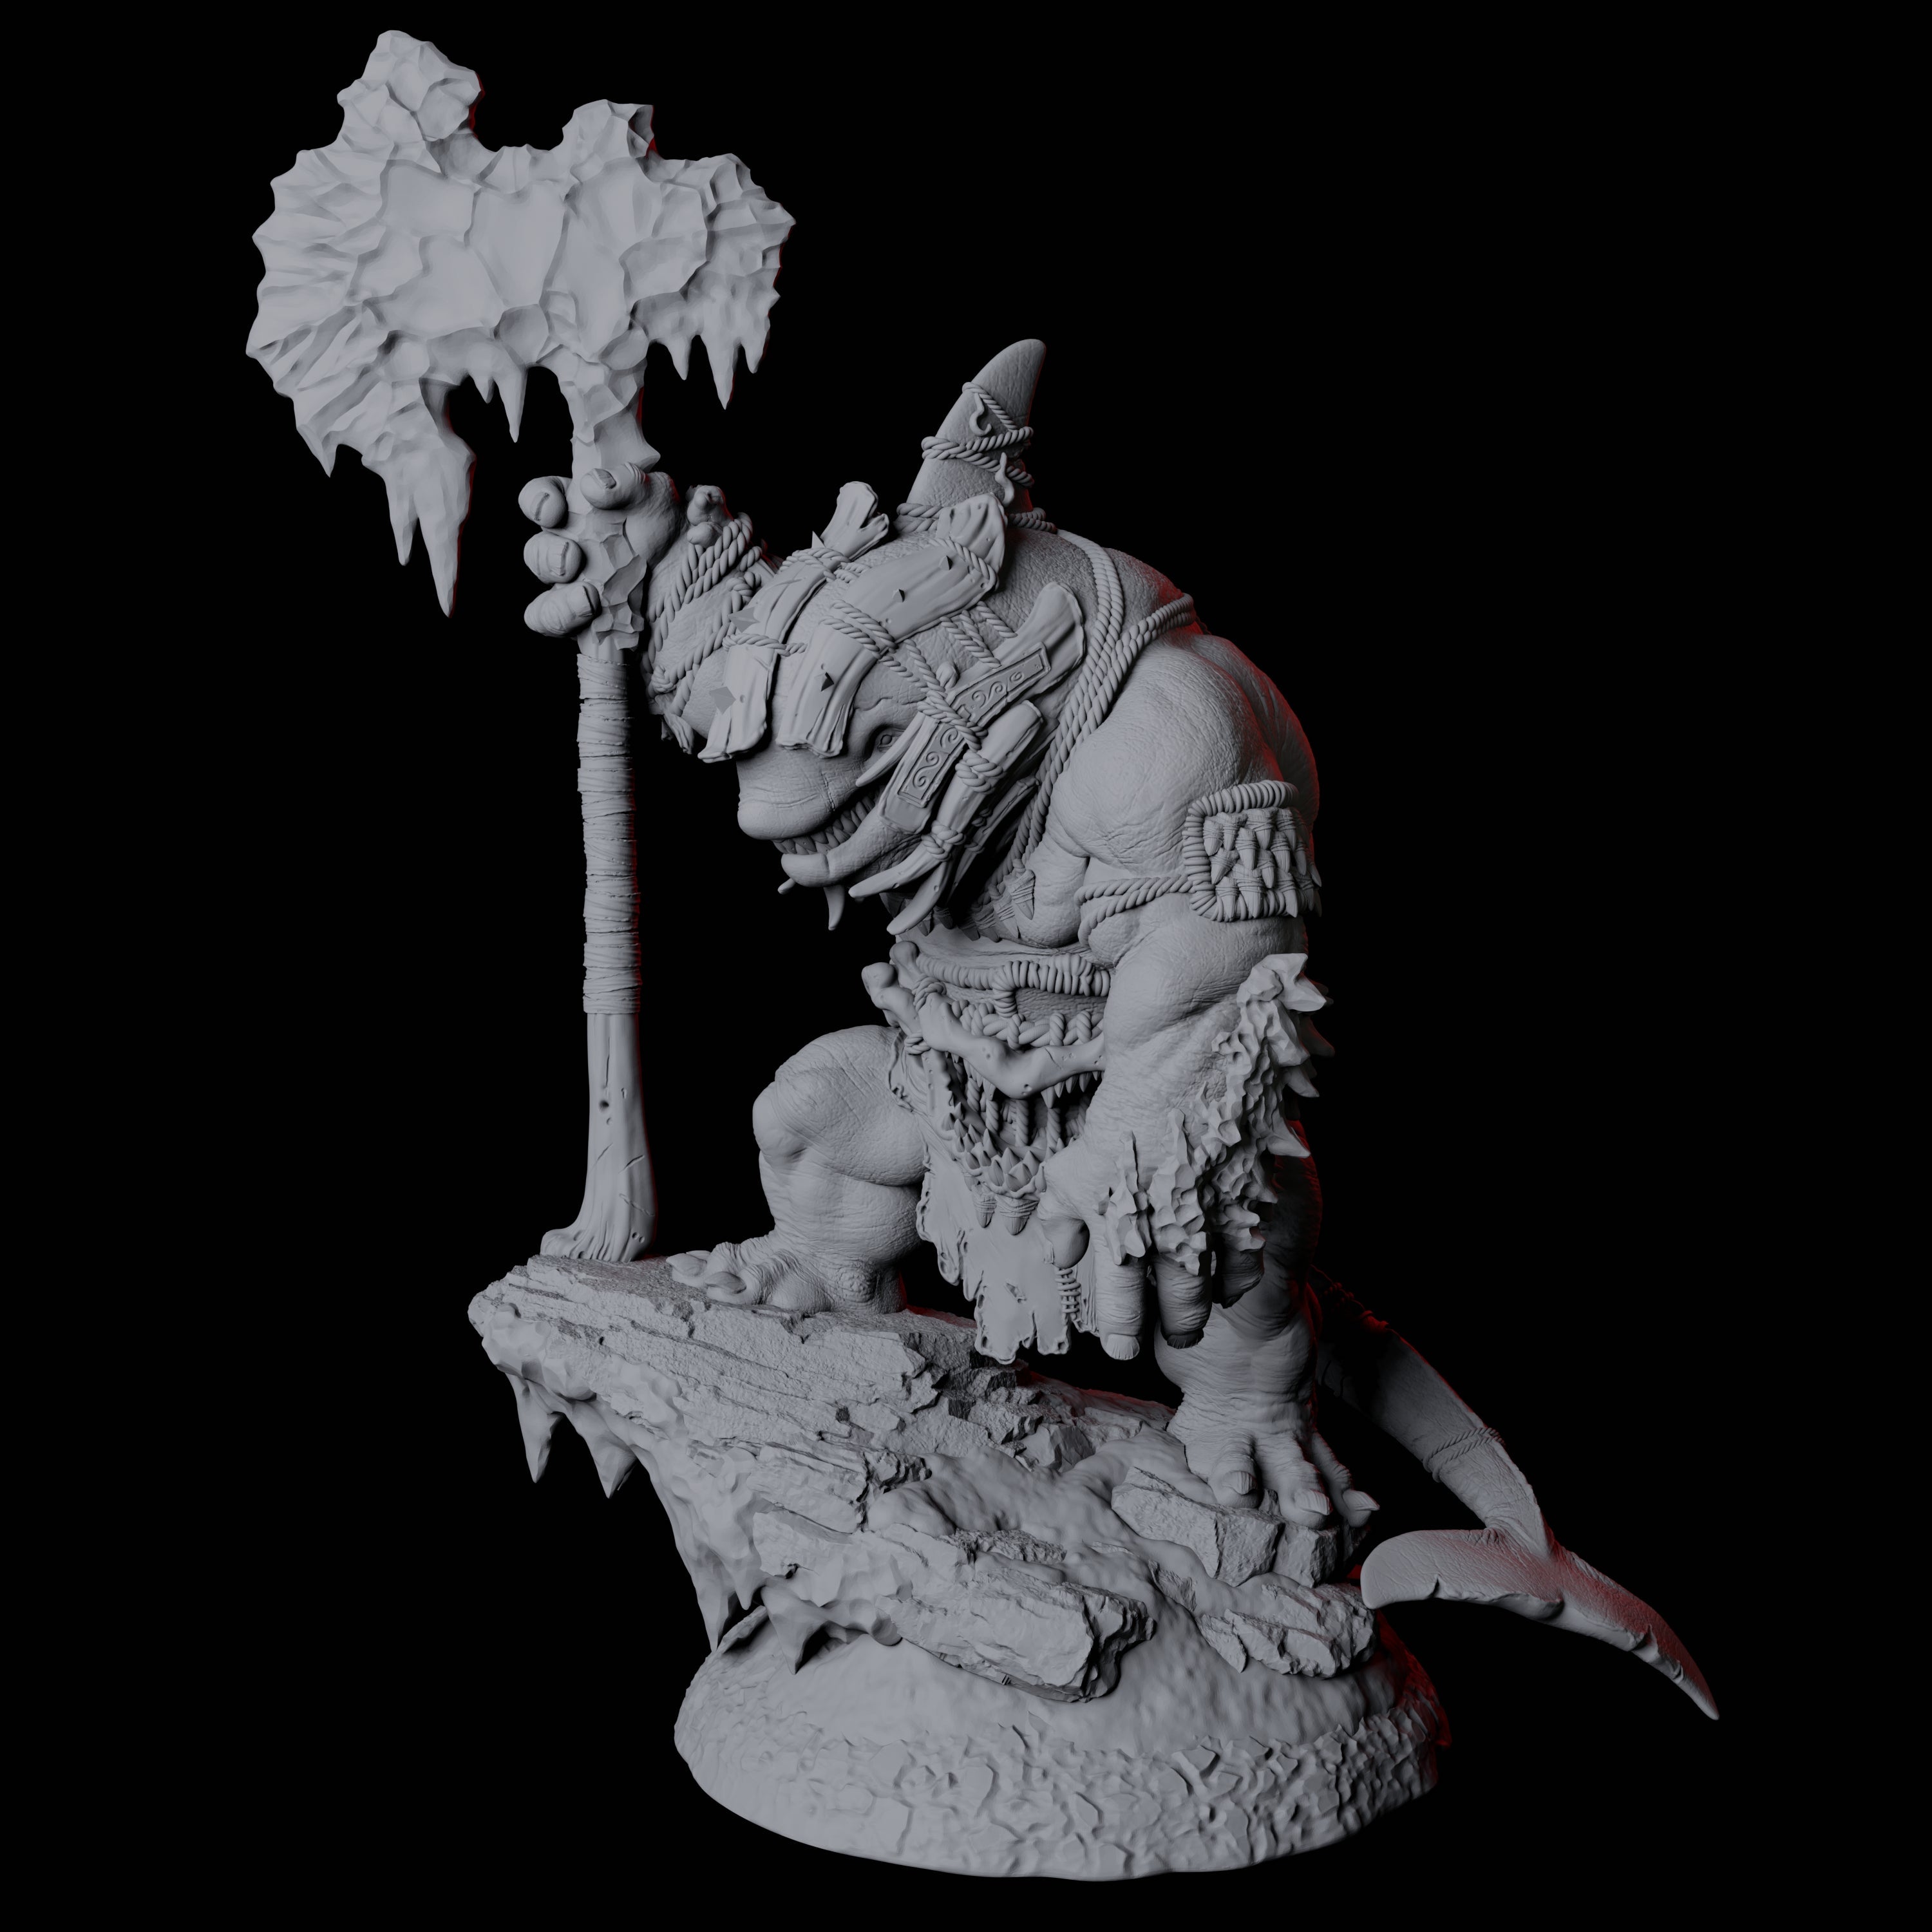 Graceful Orcafolk Warrior B Miniature for Dungeons and Dragons, Pathfinder or other TTRPGs